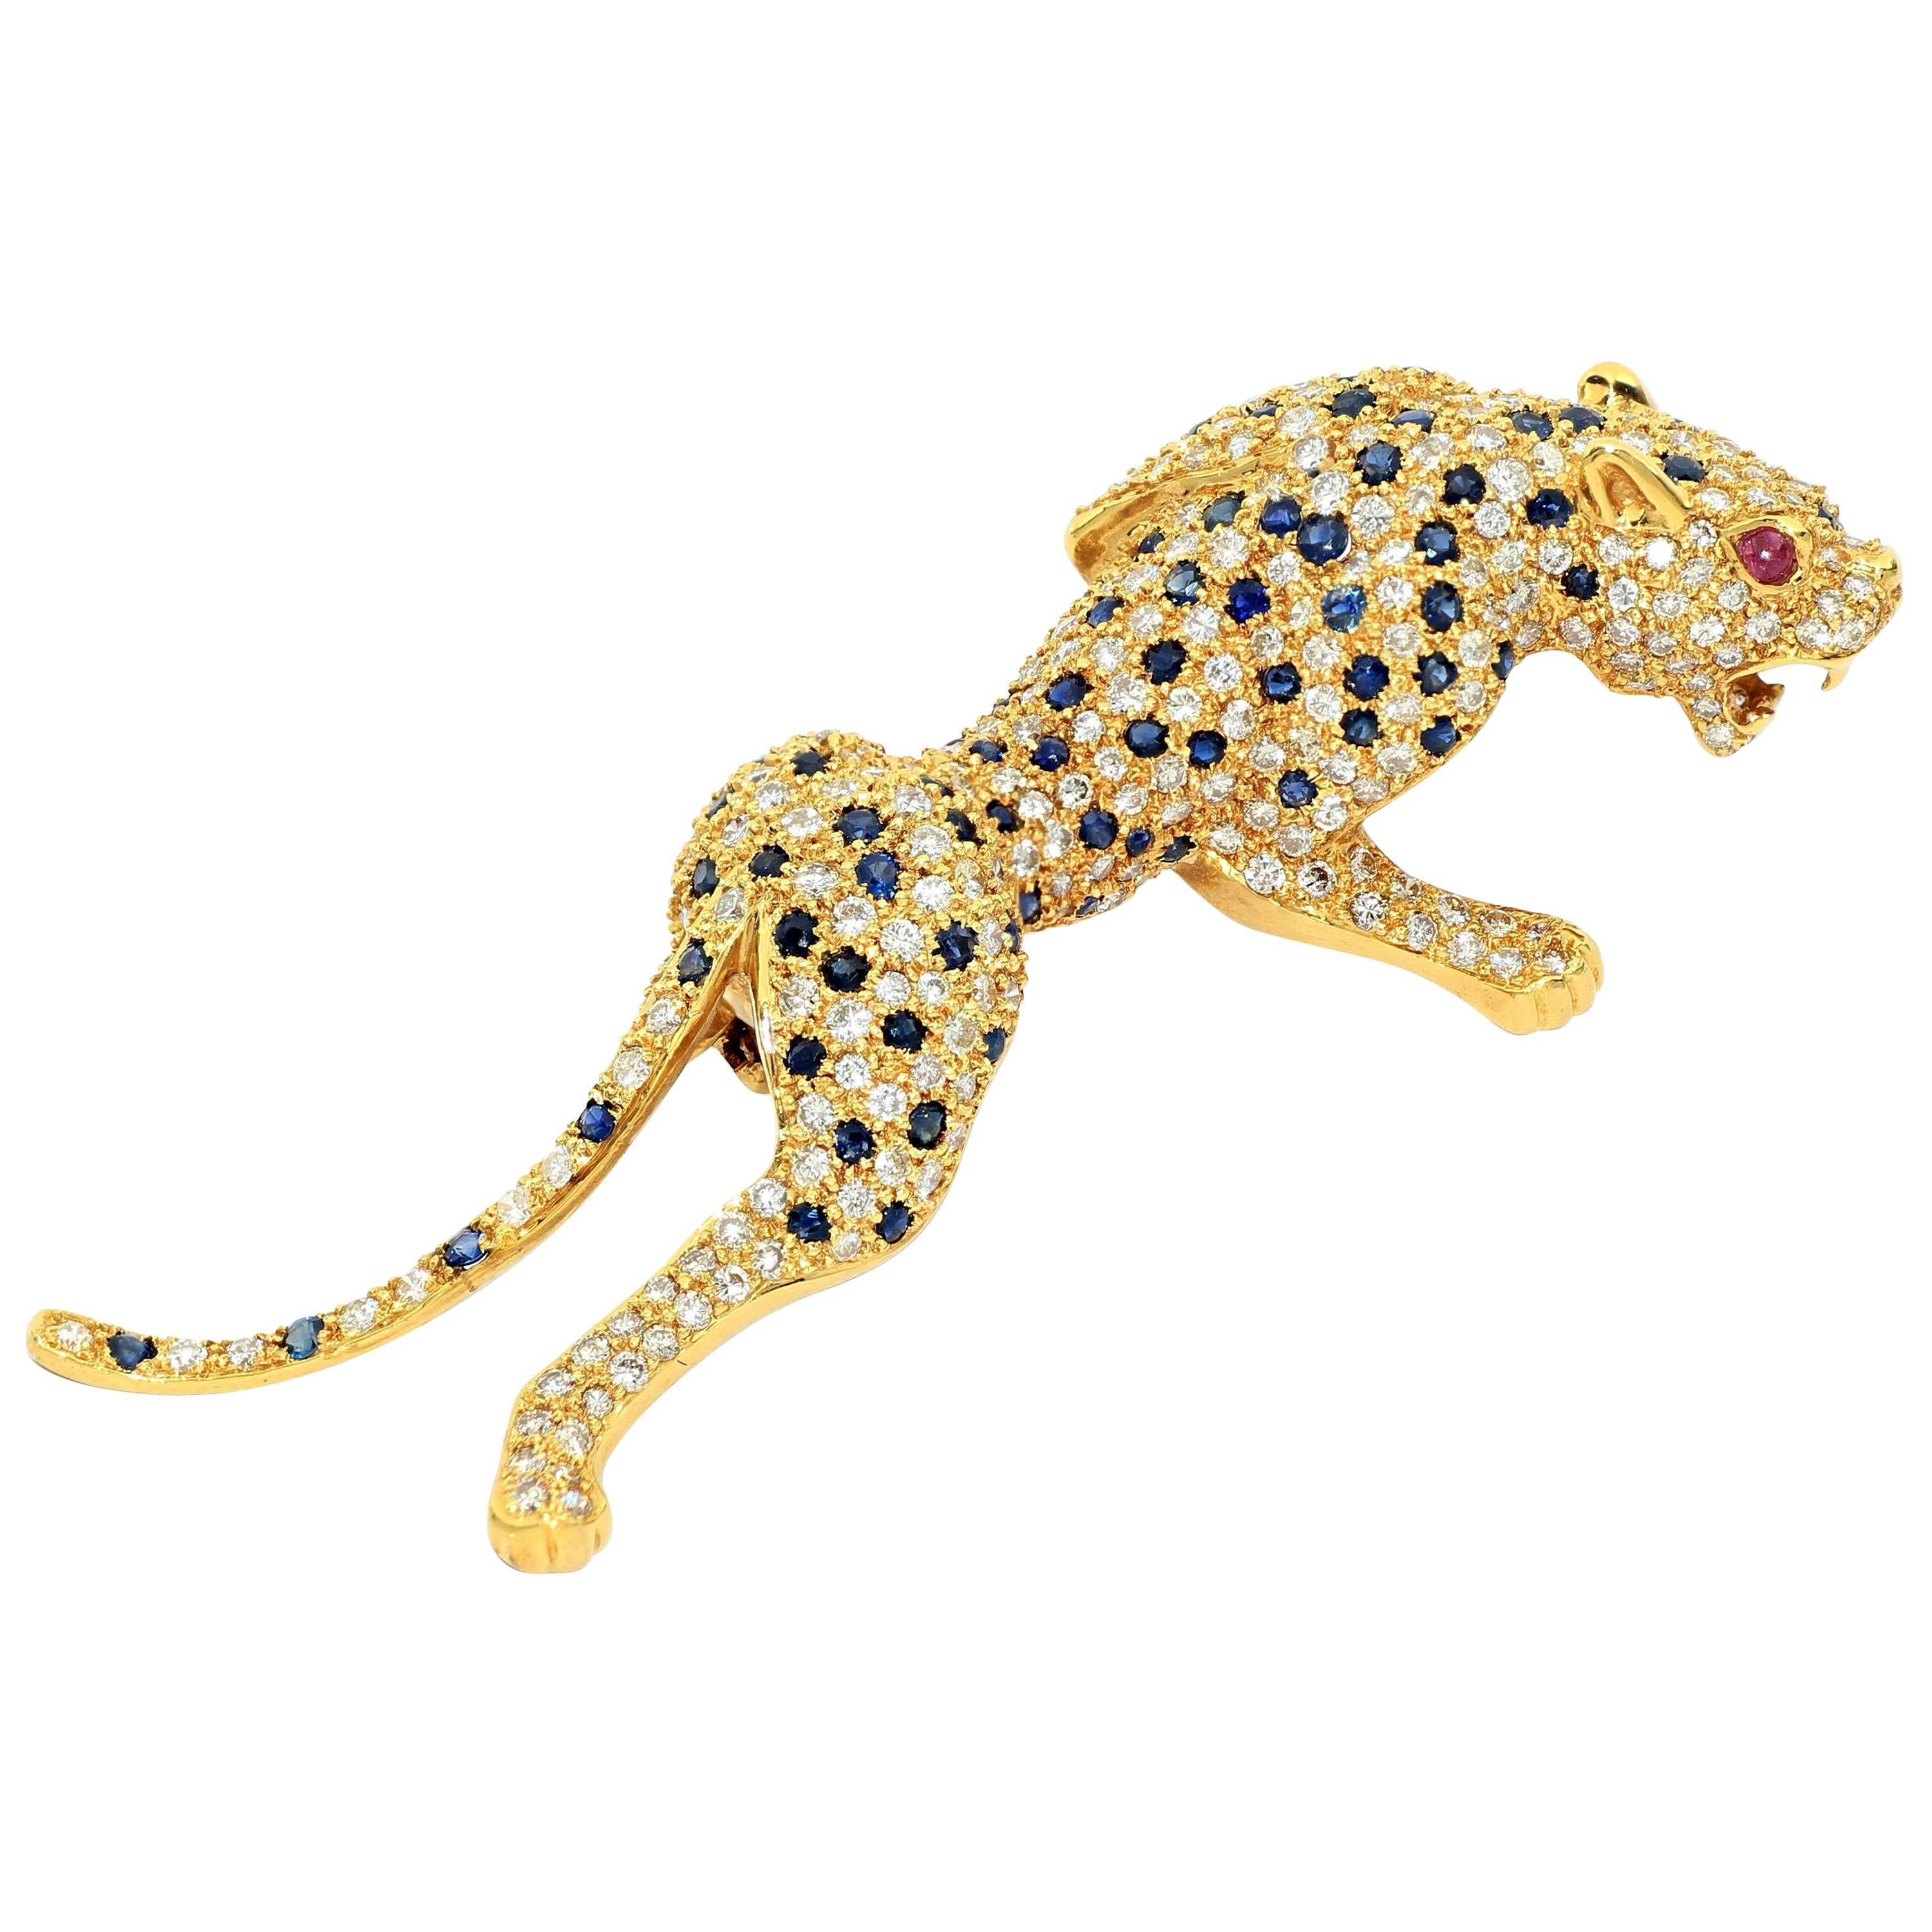 18K Gold Diamond Panther Brooch with Sapphires and Rubies  For Sale